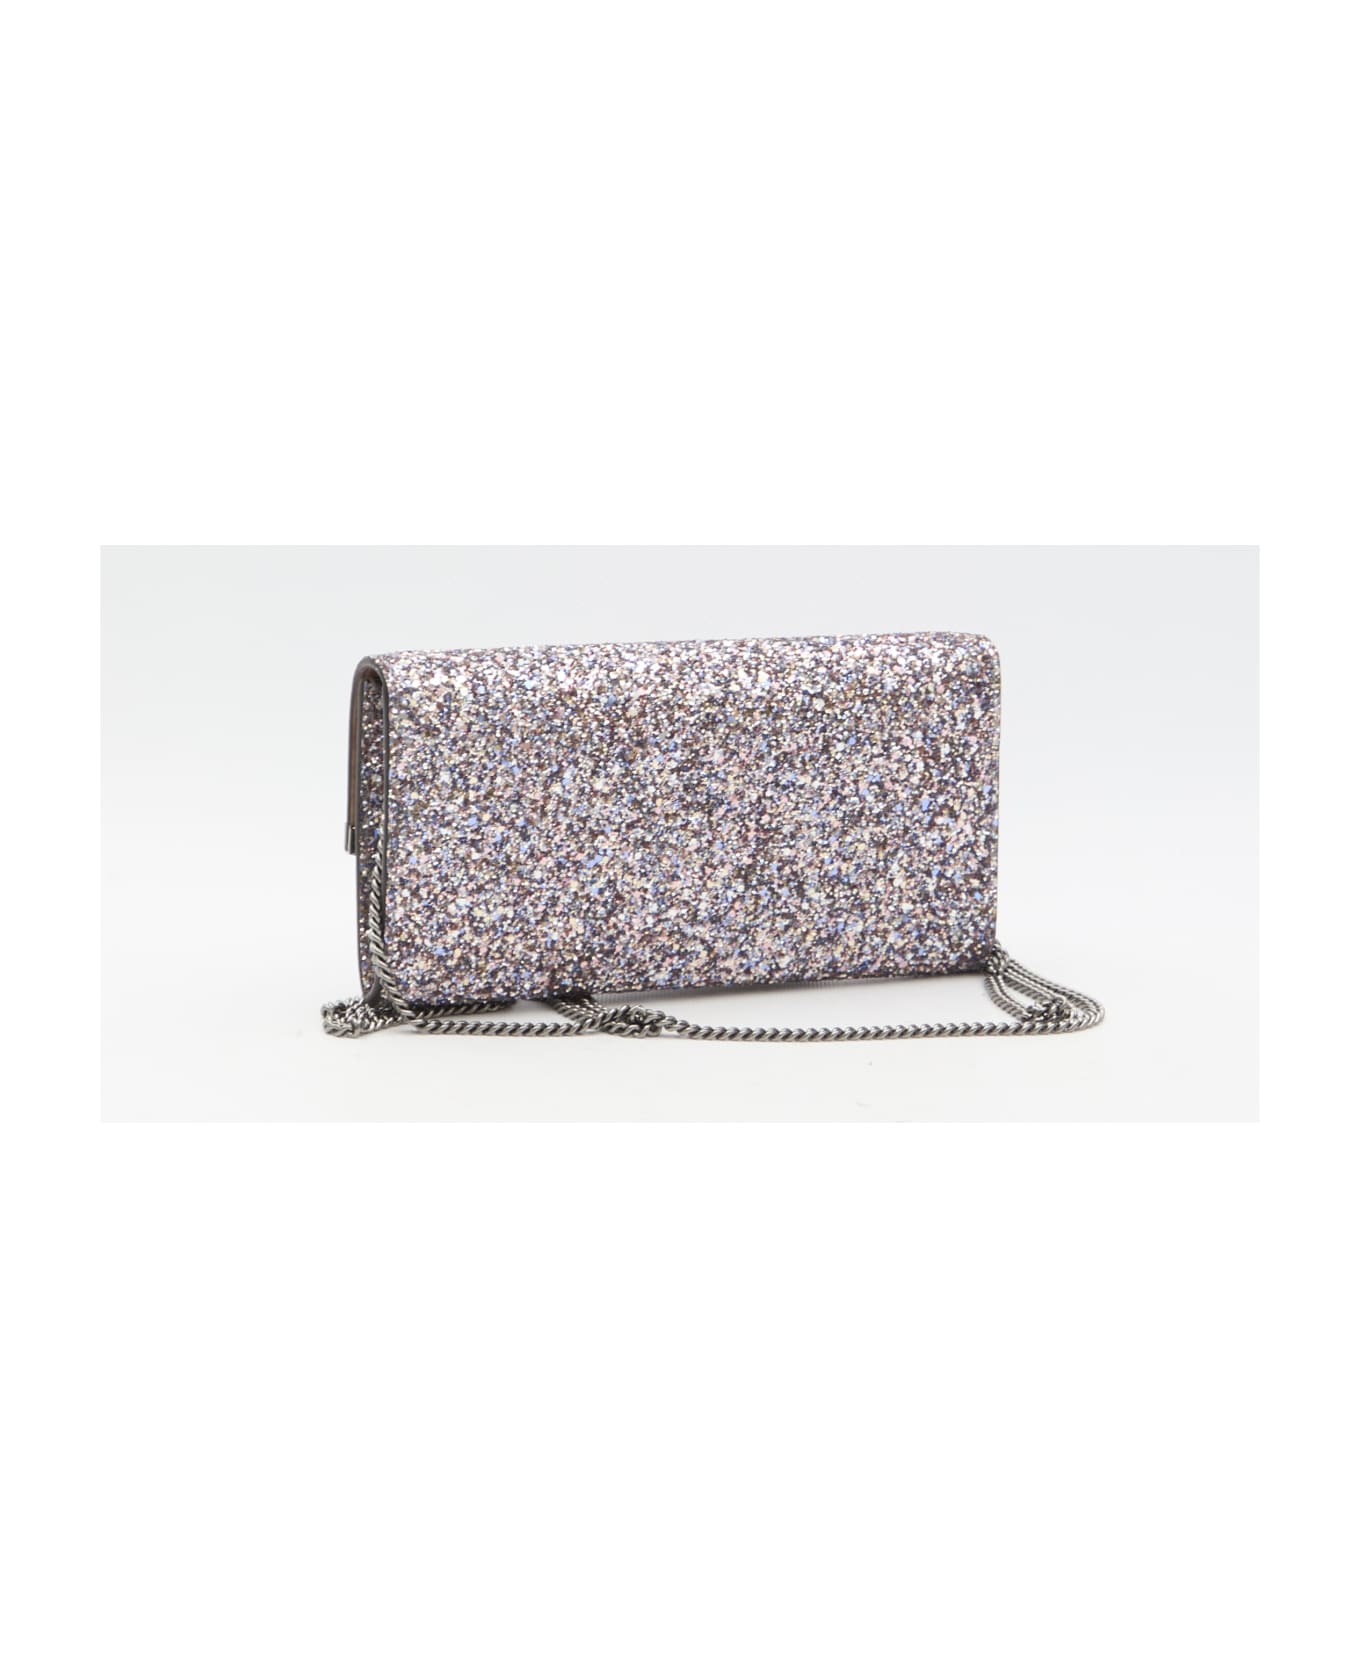 Jimmy Choo Emmie Pouch - MultiColour クラッチバッグ